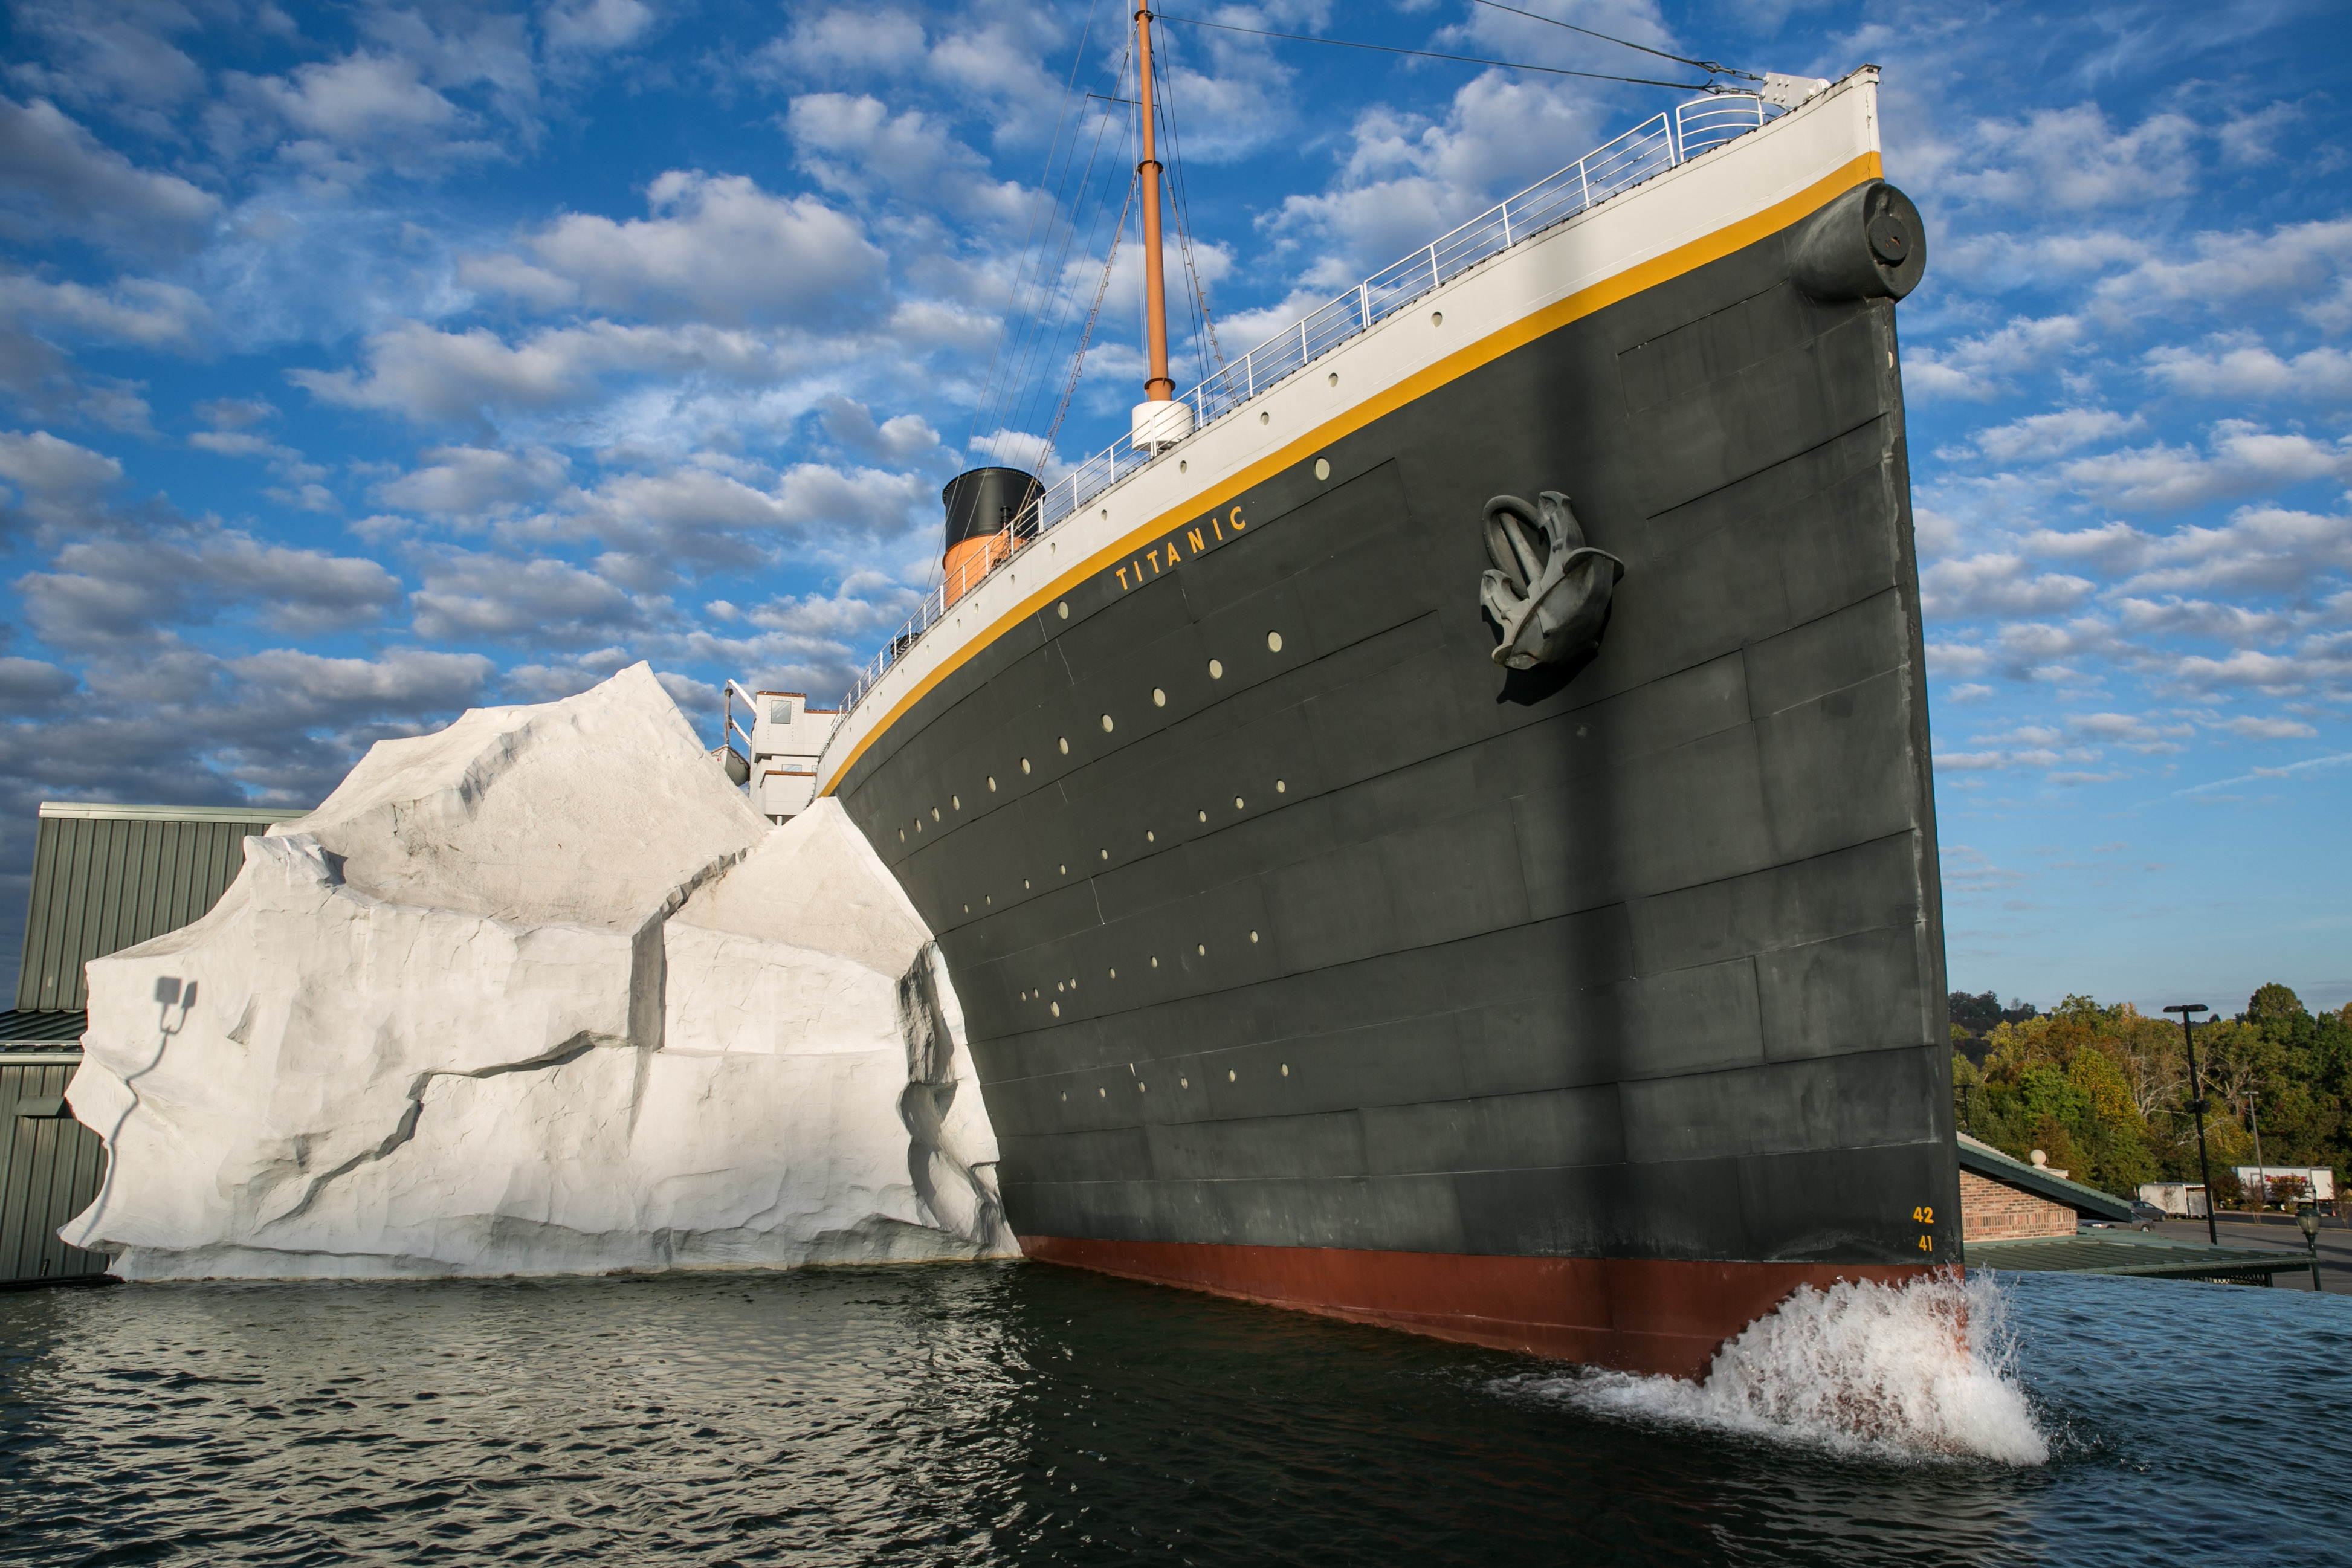 3 injured after 'iceberg' at Titanic museum collapses - National |  